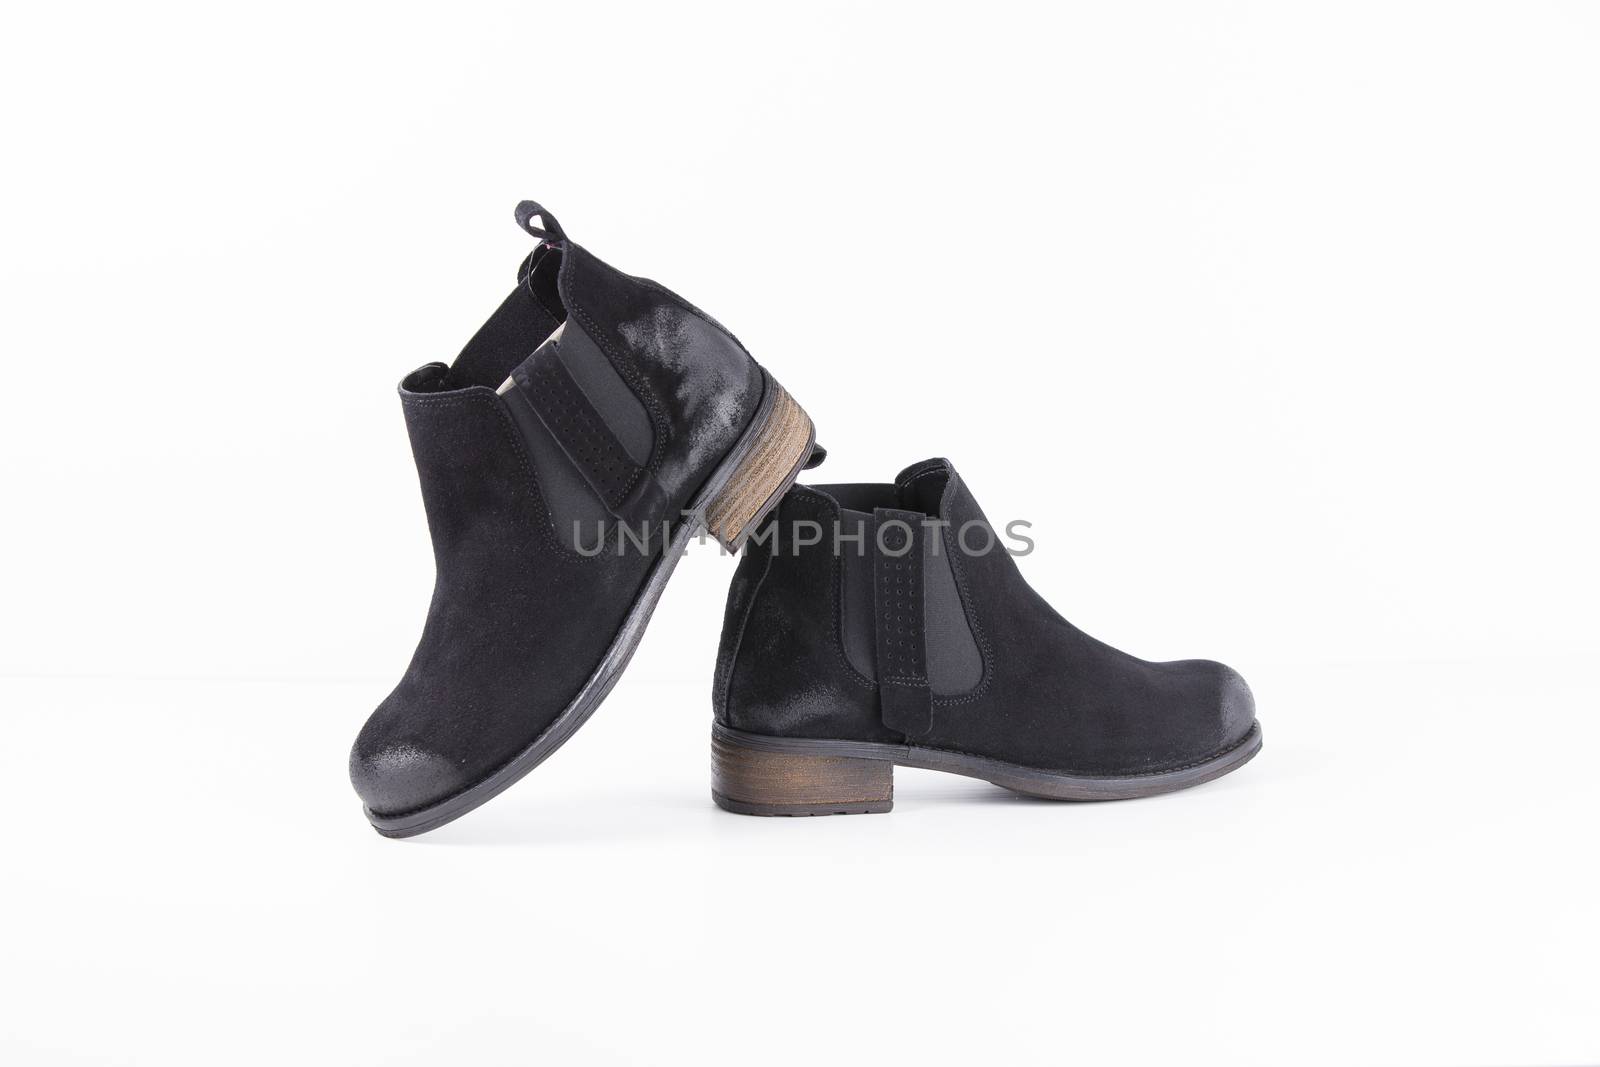 Pair of black leather boots on white background, isolated product. by GeorgeVieiraSilva